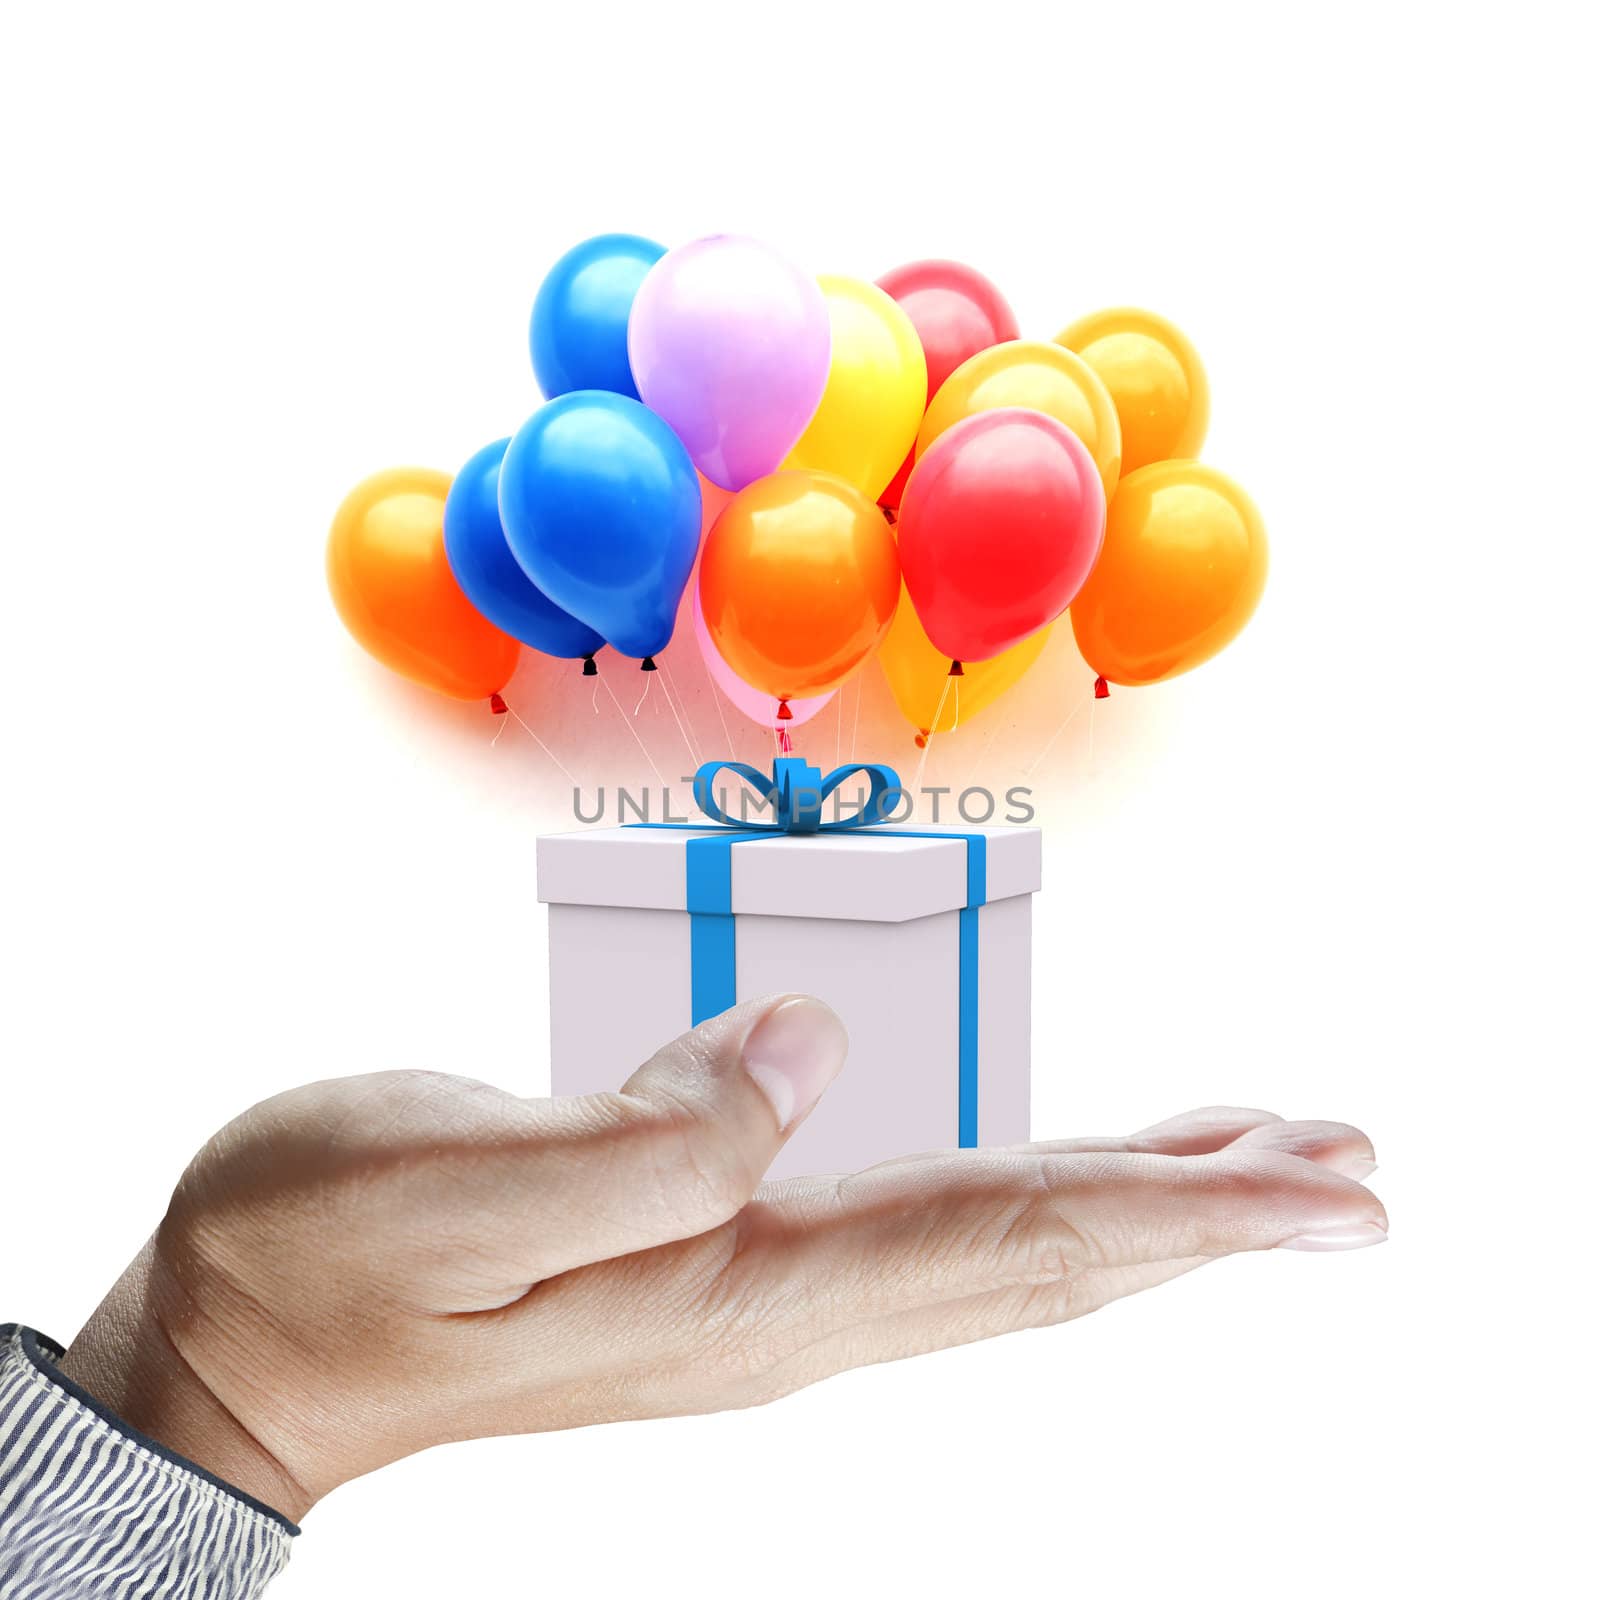 Hands holding gift in package with blue ribbon and colorful balloons isolated on white